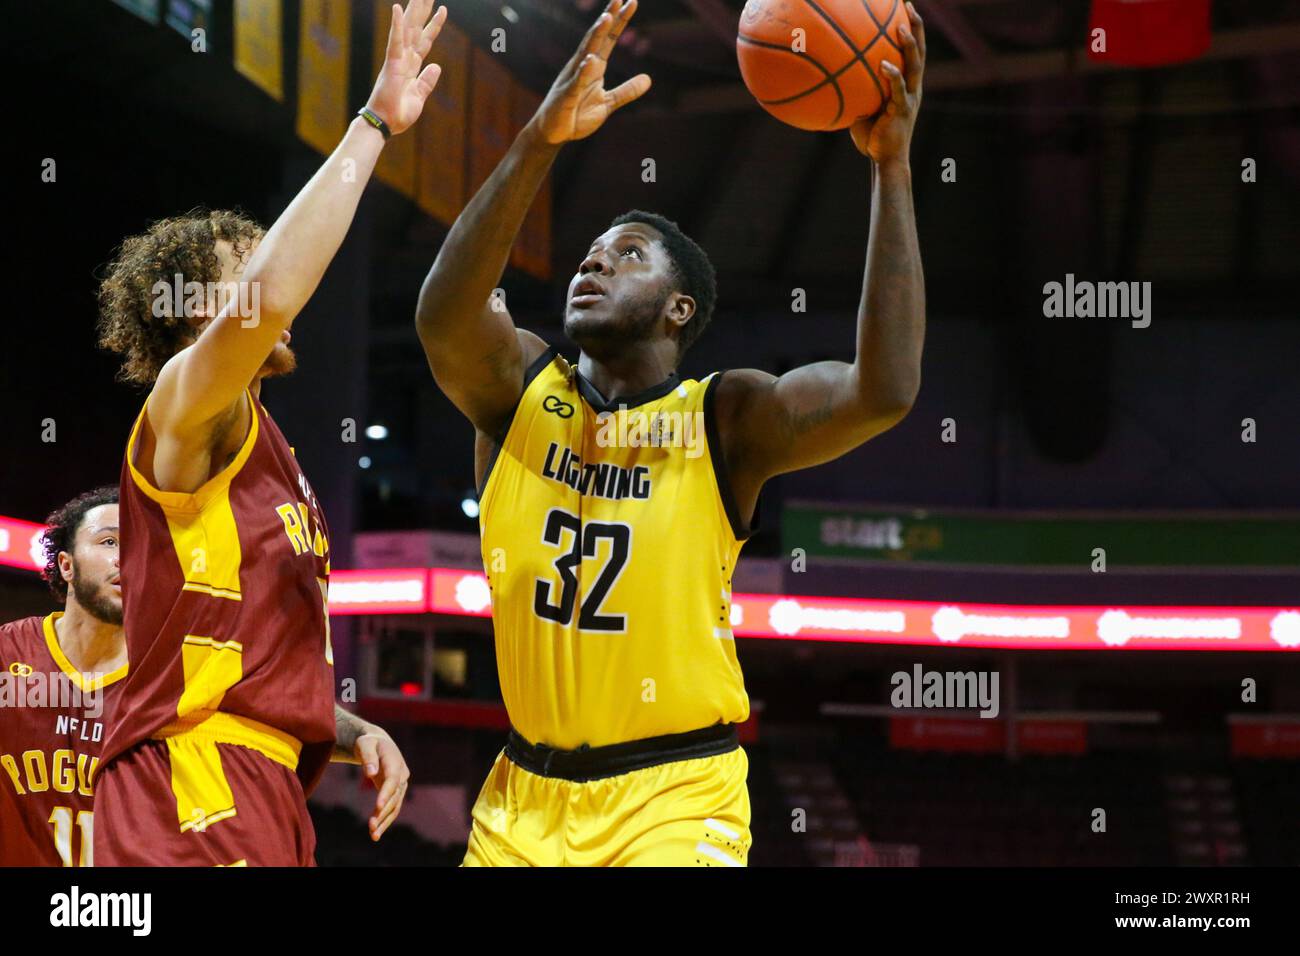 London, Canada. 1st Apr, 2024. The London Lightning lead the Newfoundland Rogues 60-56 at half time. Drew Gordon (32) of the London Lightning takes a shot under pressure from Lewis Djonkam (8) of the Newfoundland Rogues during the second quarter. Credit: Luke Durda/Alamy Live News Stock Photo